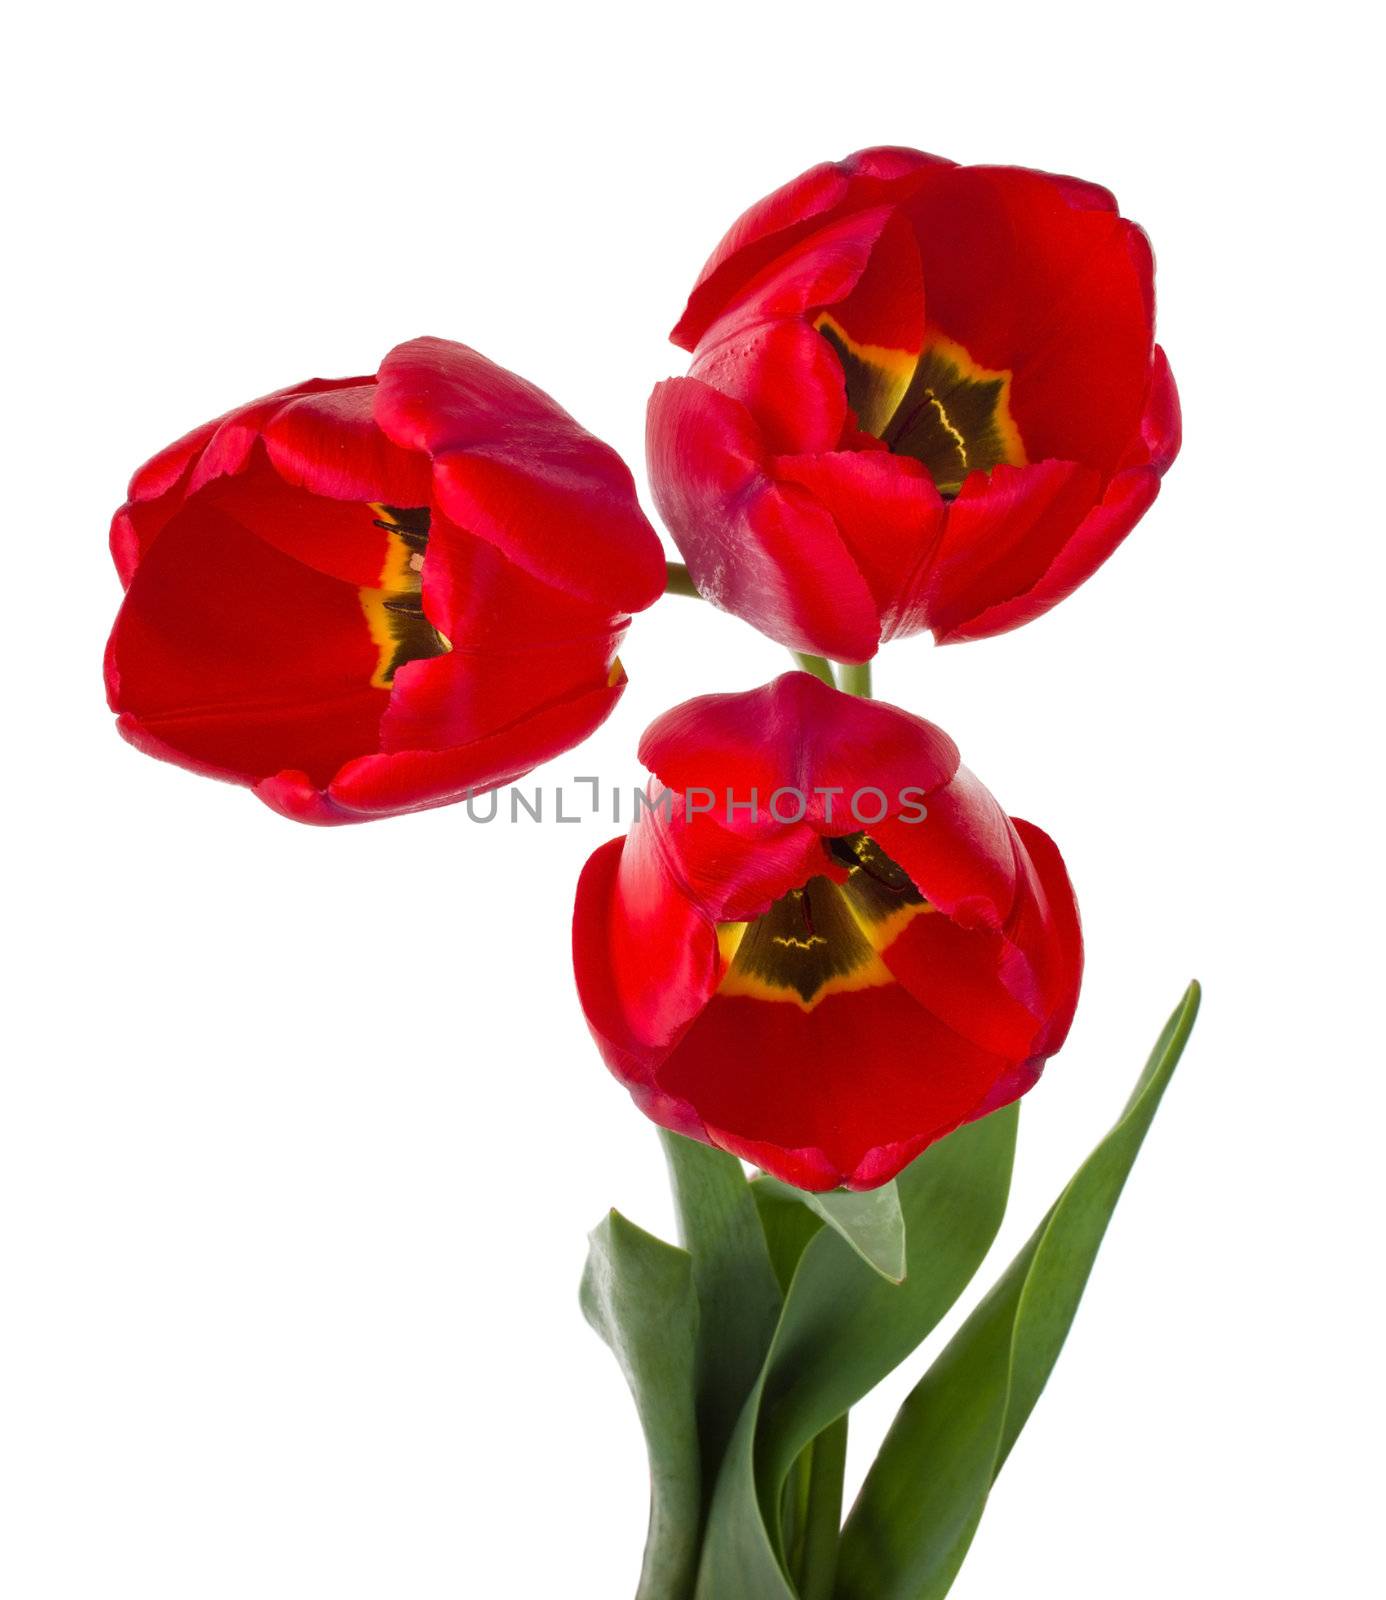 red tulips bouquet by Alekcey